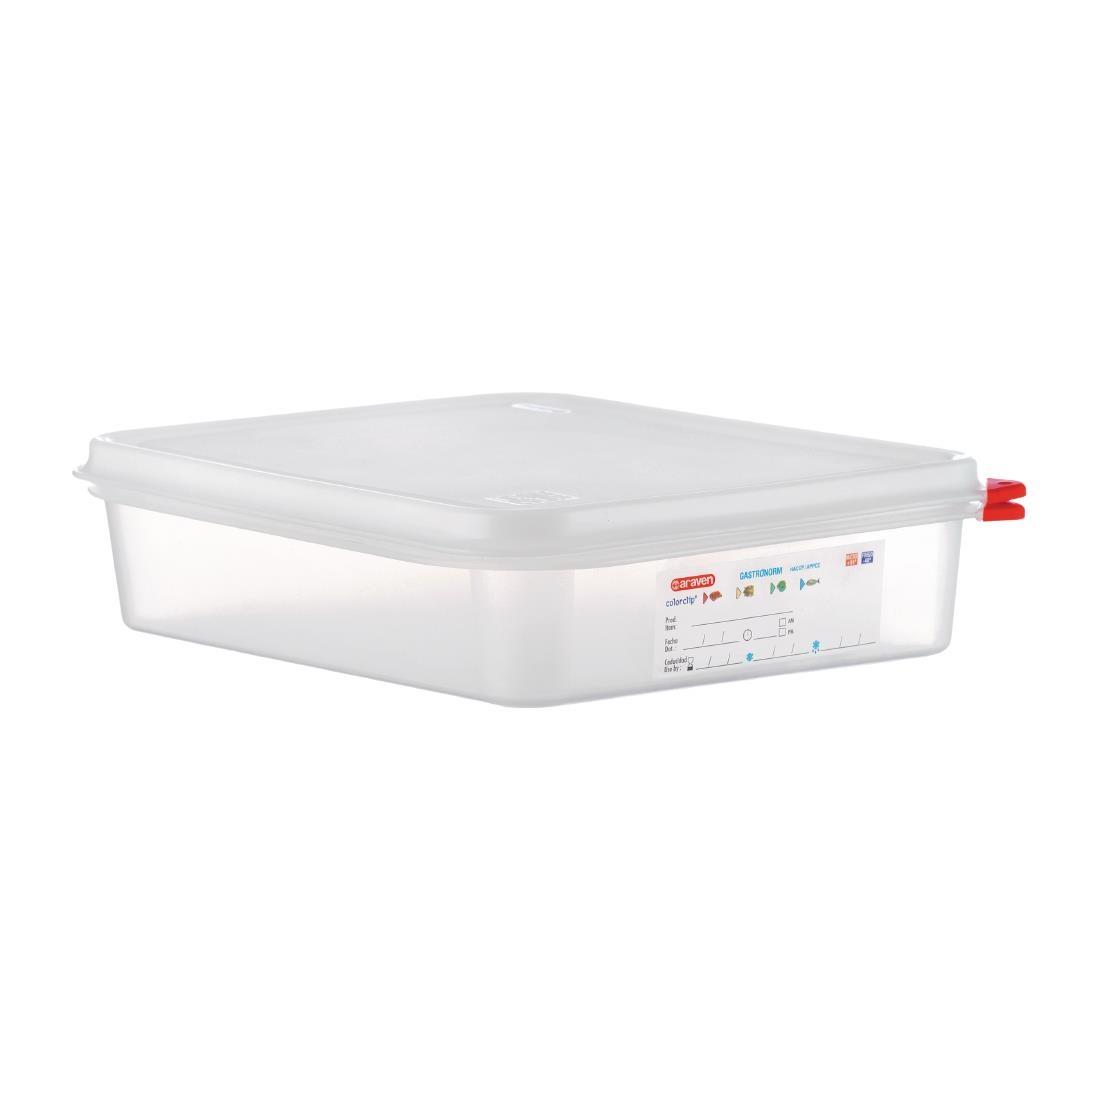 Araven Polypropylene 1/2 Gastronorm Food Containers 4L (Pack of 4) - GL261  - 2